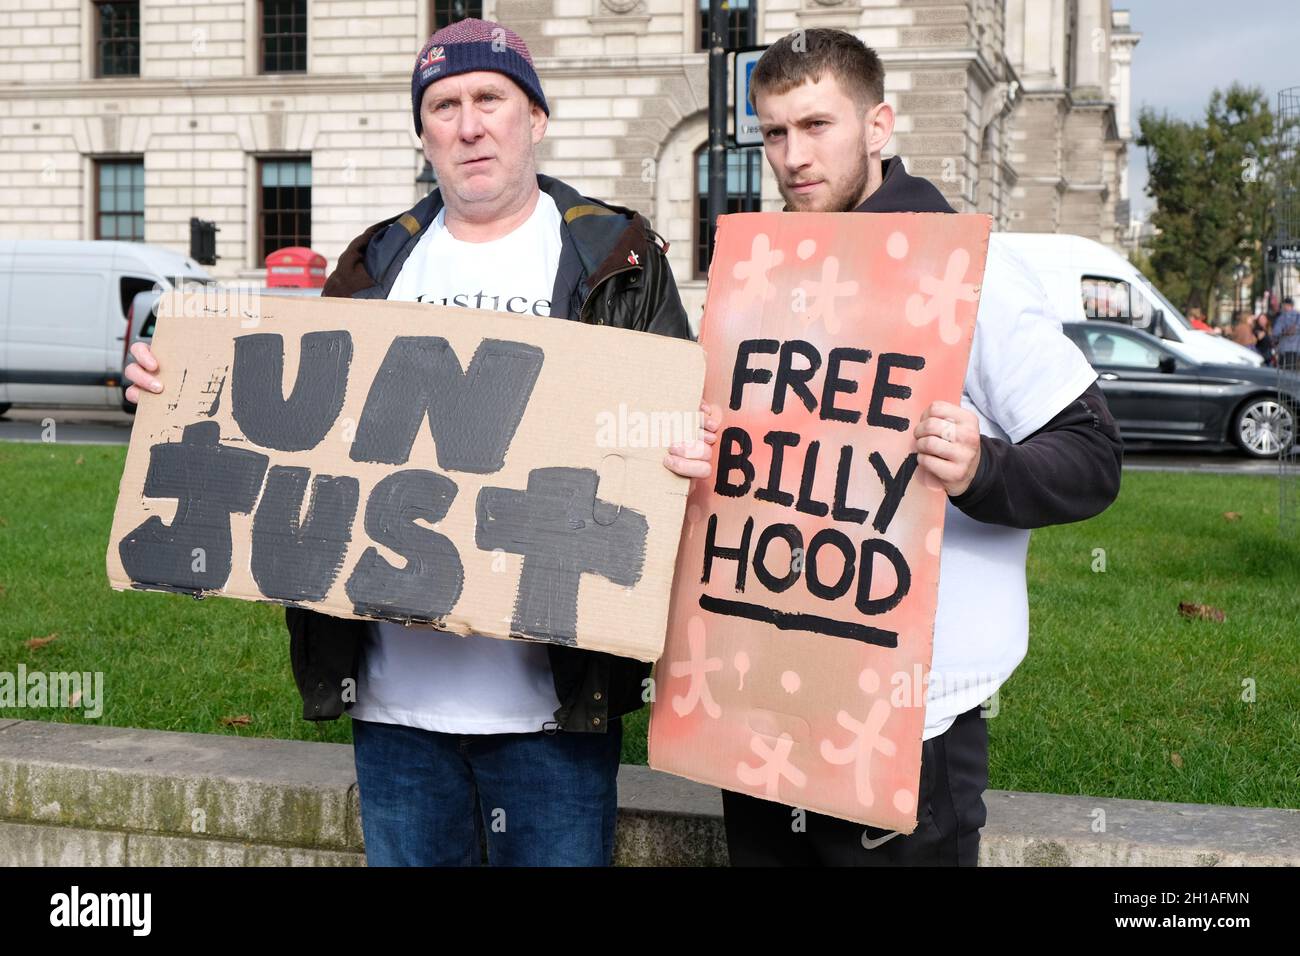 London, UK. A friend and the father of British man Billy Hood protest against his 25-year long sentence for possessing CBD vape oil in Dubai. Stock Photo